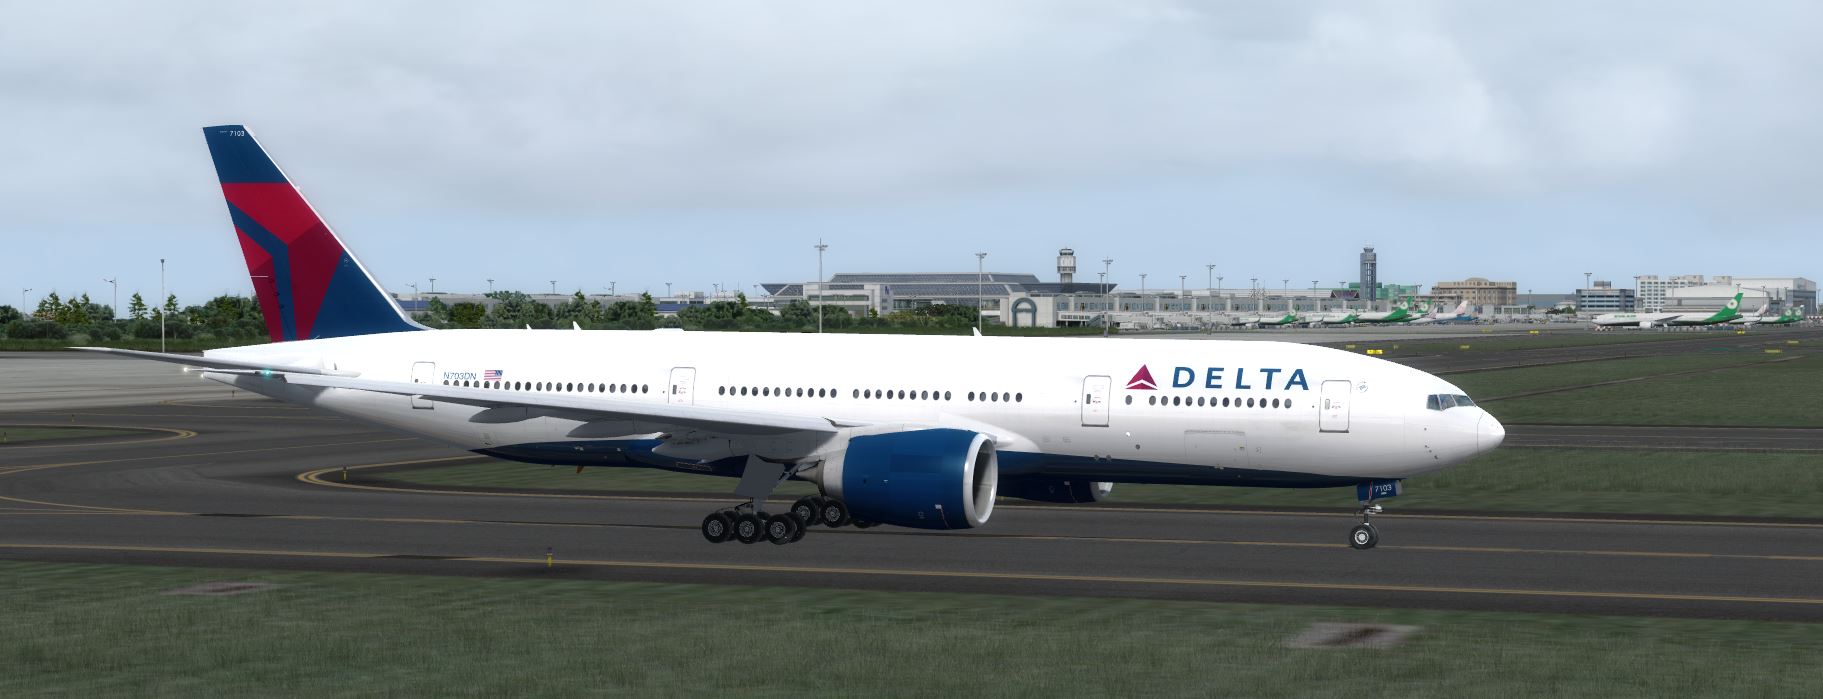 B777-200 Delta Airlines Standard Livery-2083 